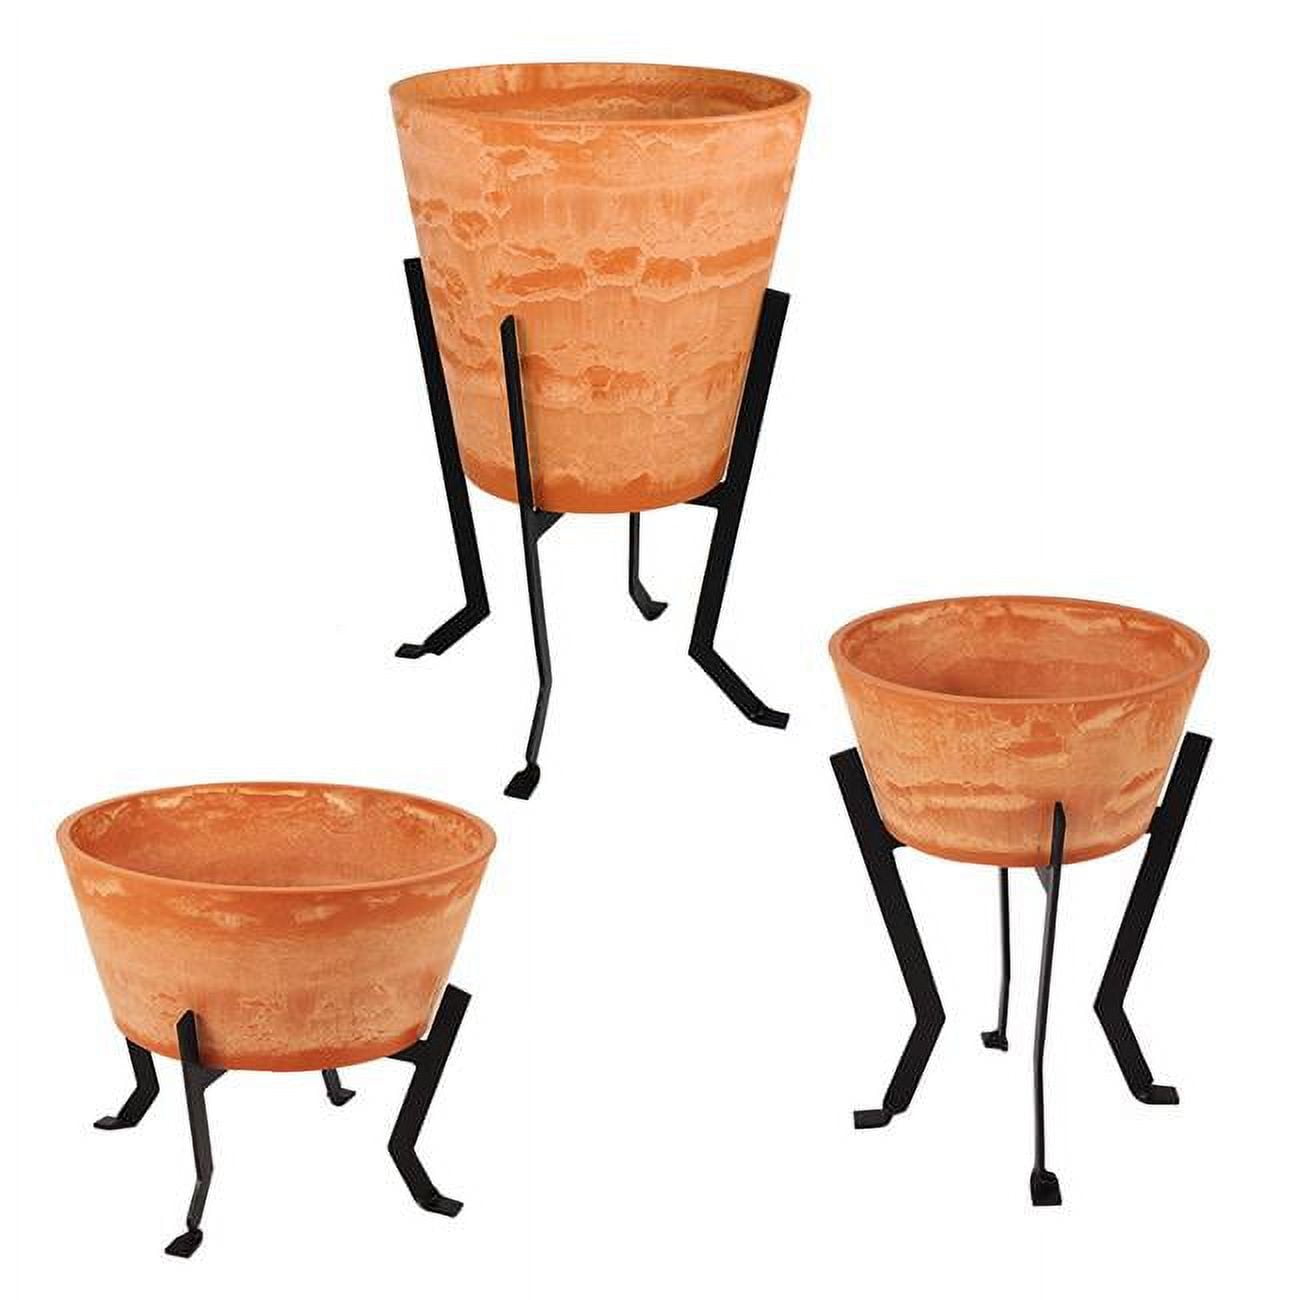 Achla Fb-60 Denise Iii Plant Stand, Terracotta